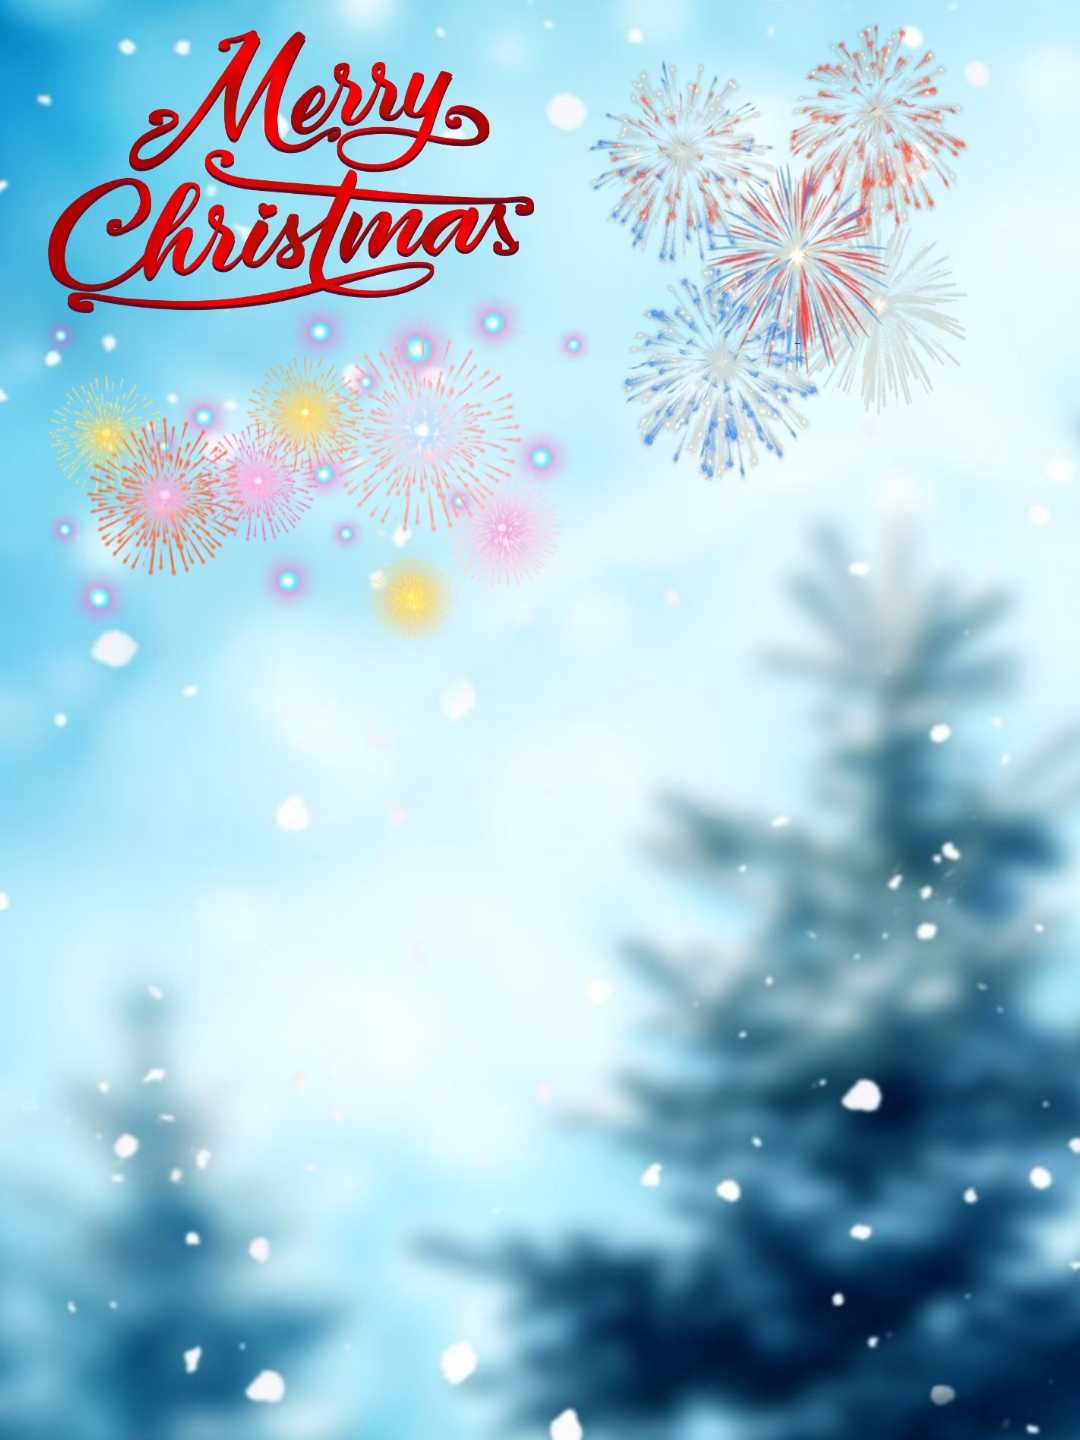 Merry christmas background images for photoshop